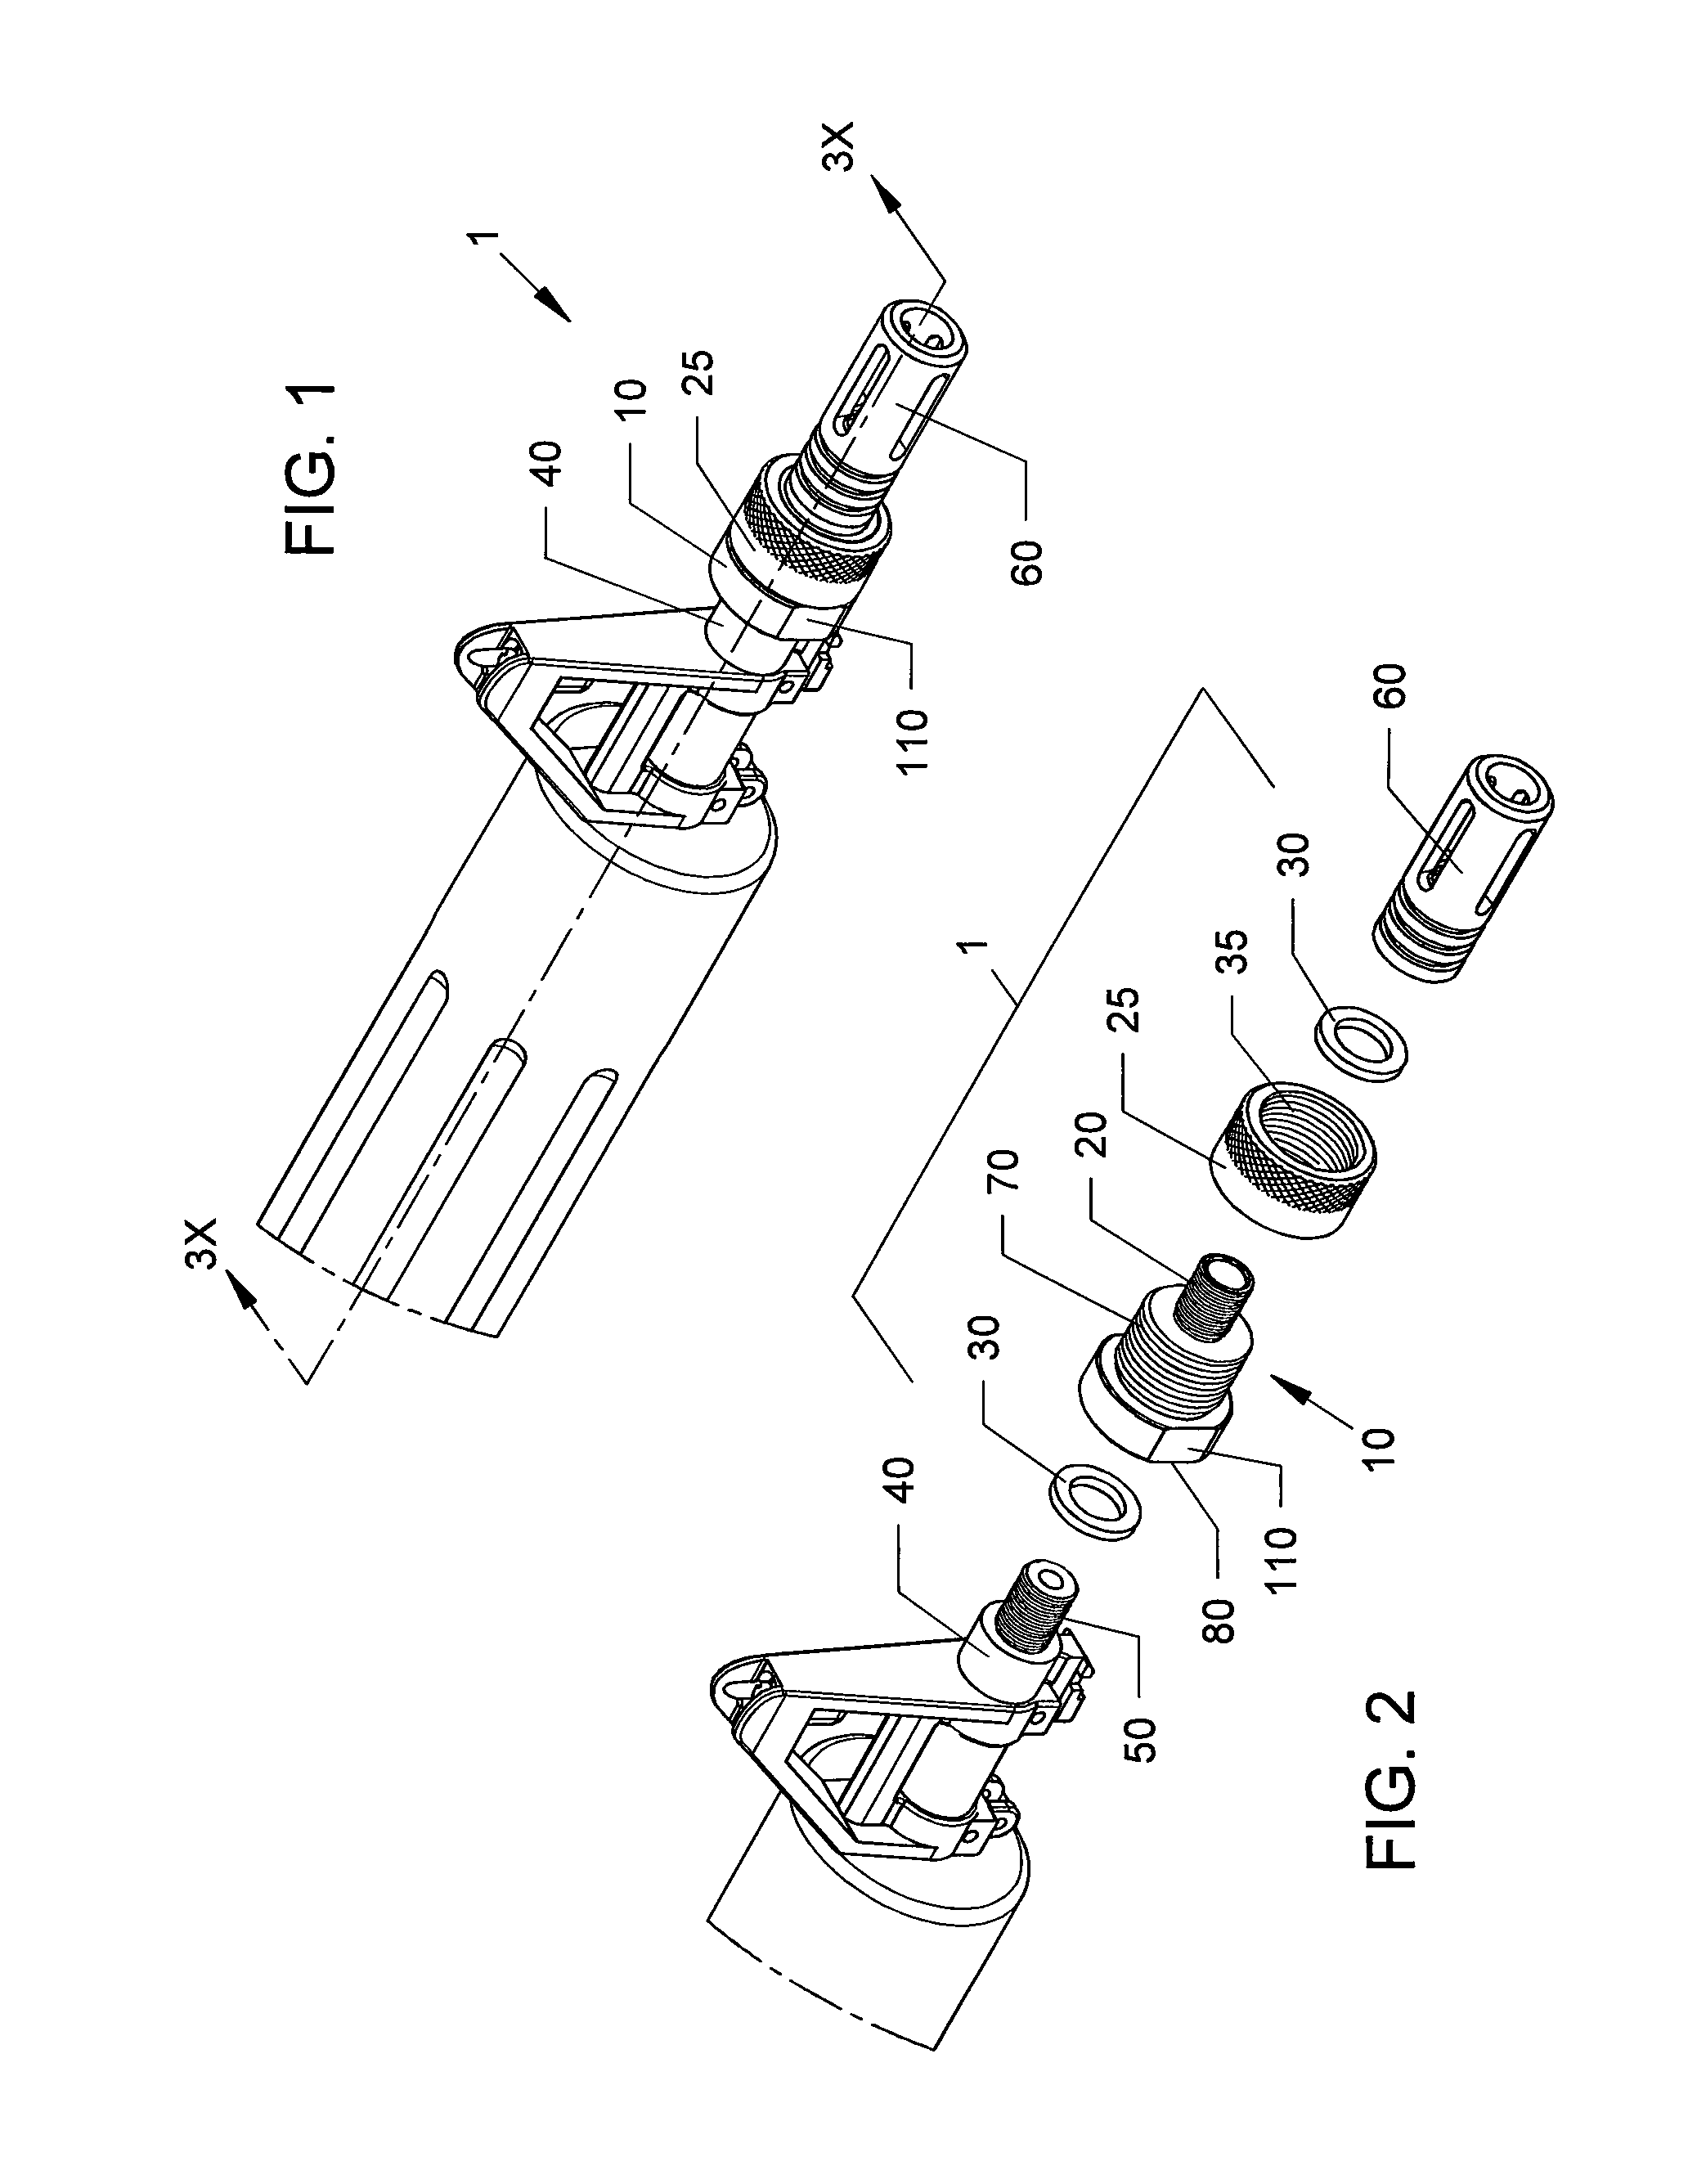 Integrated muzzle adapter coupling system